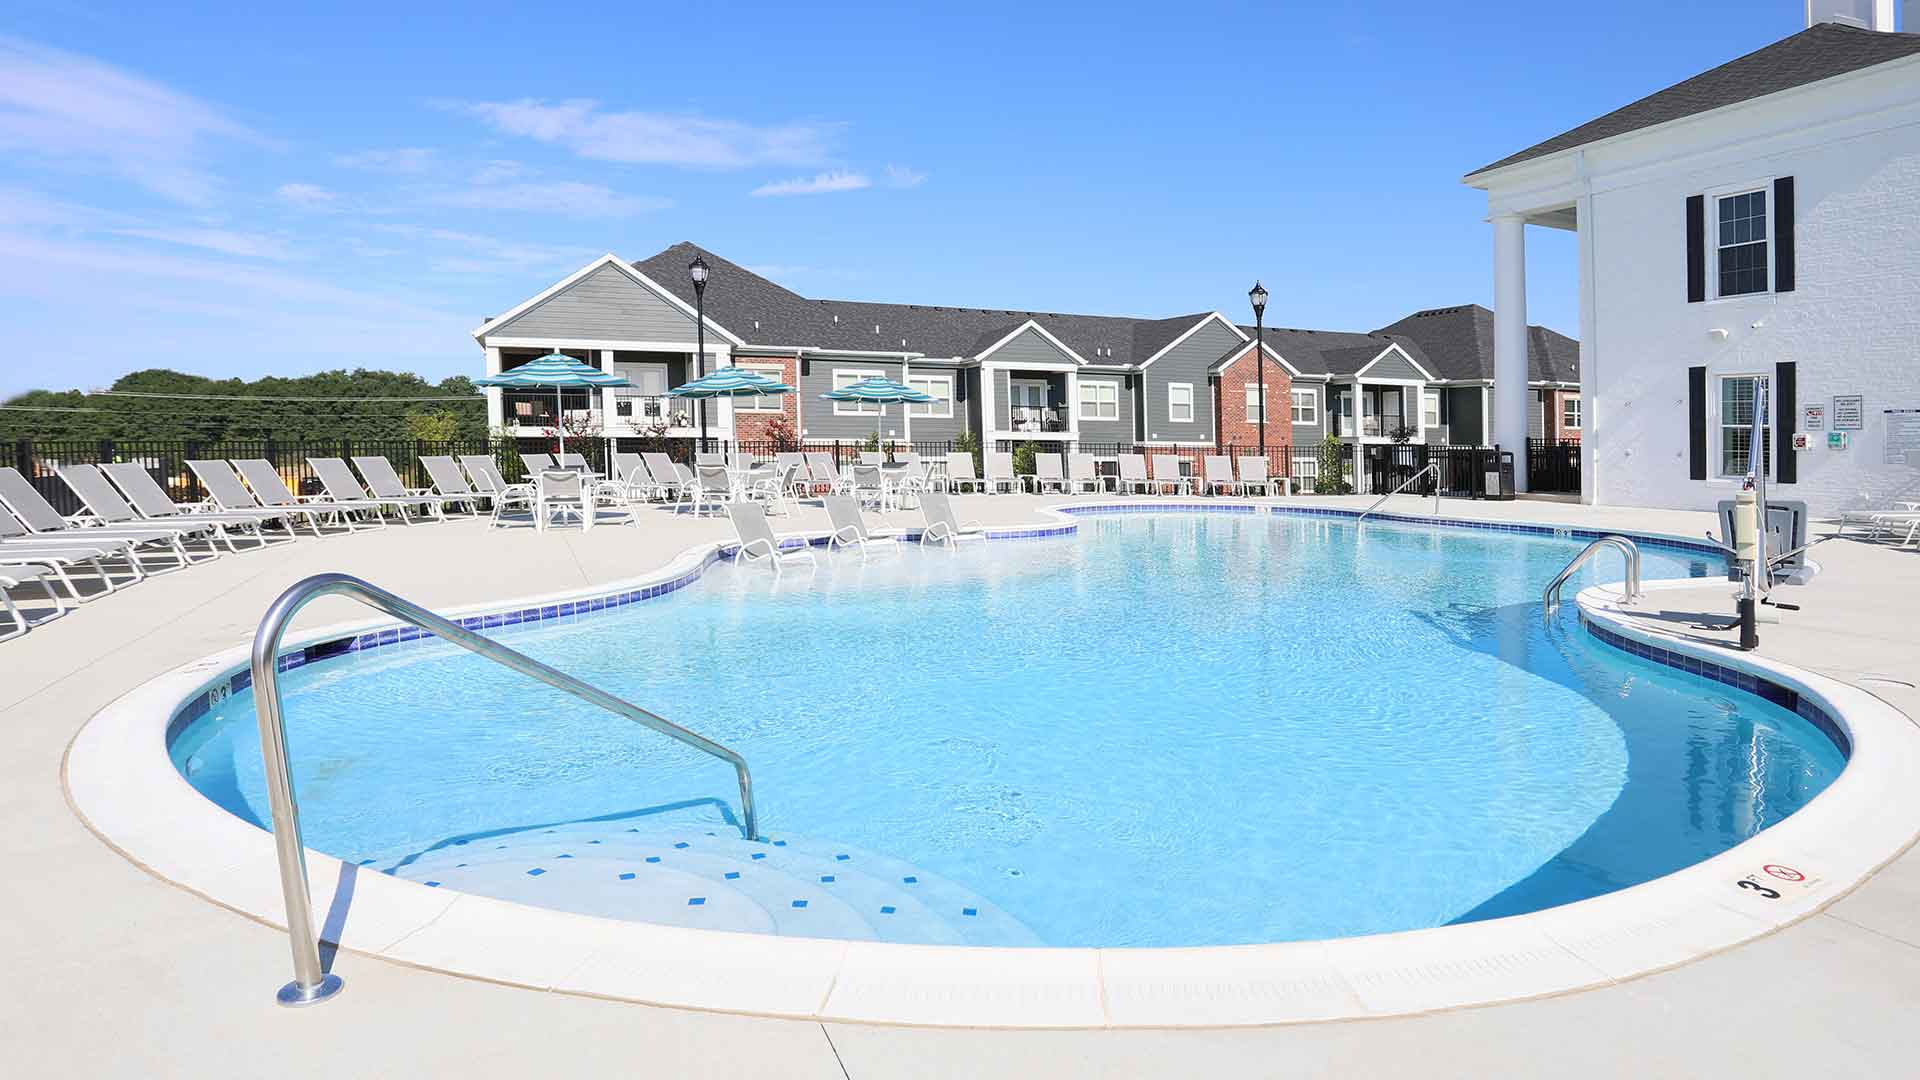 Outdoor pool area at Greyson on 27.